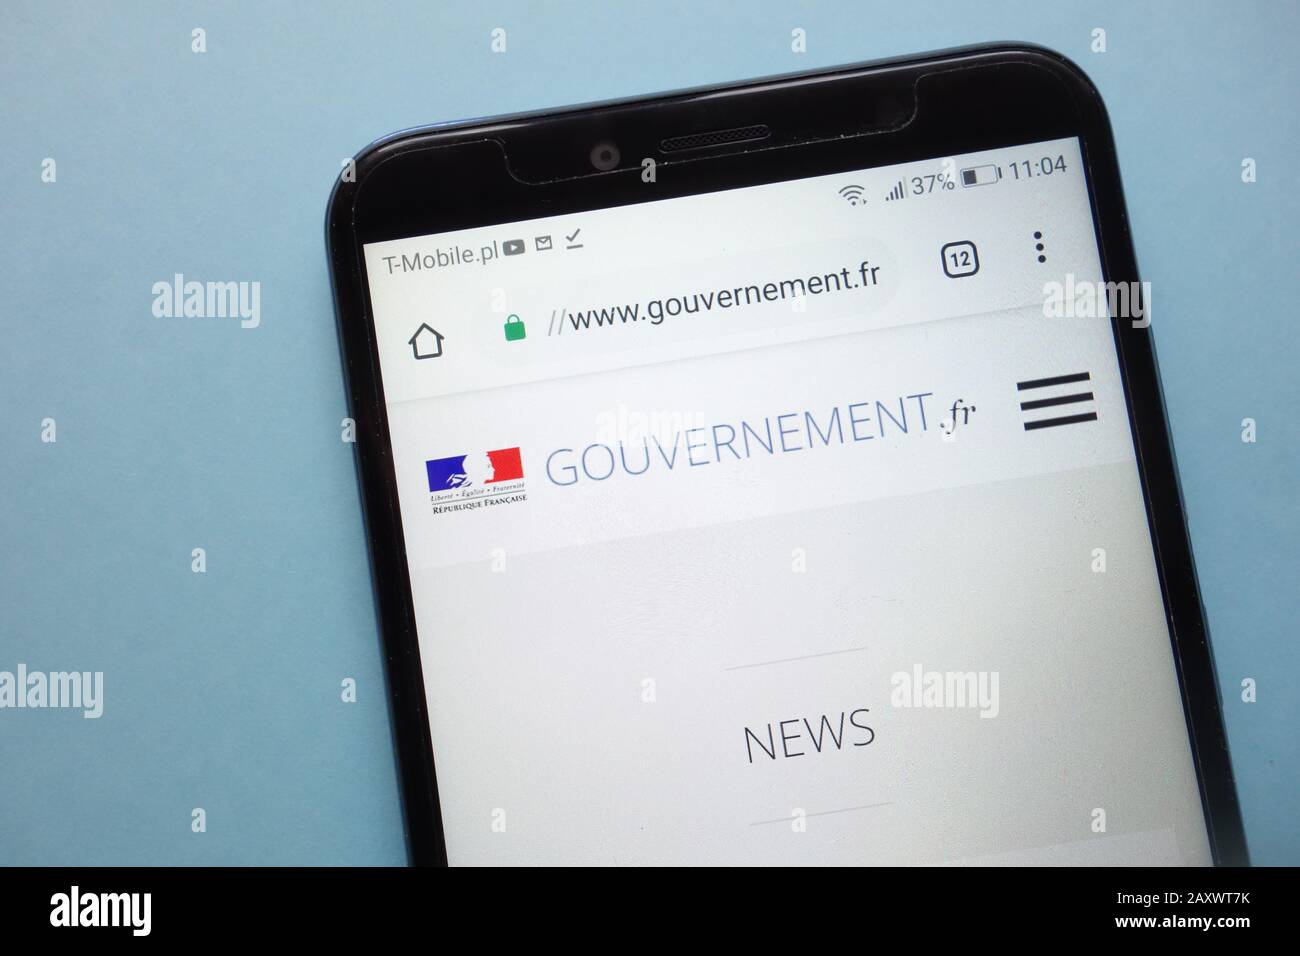 The French Government website (www.gouvernement.fr) displayed on smartphone Stock Photo